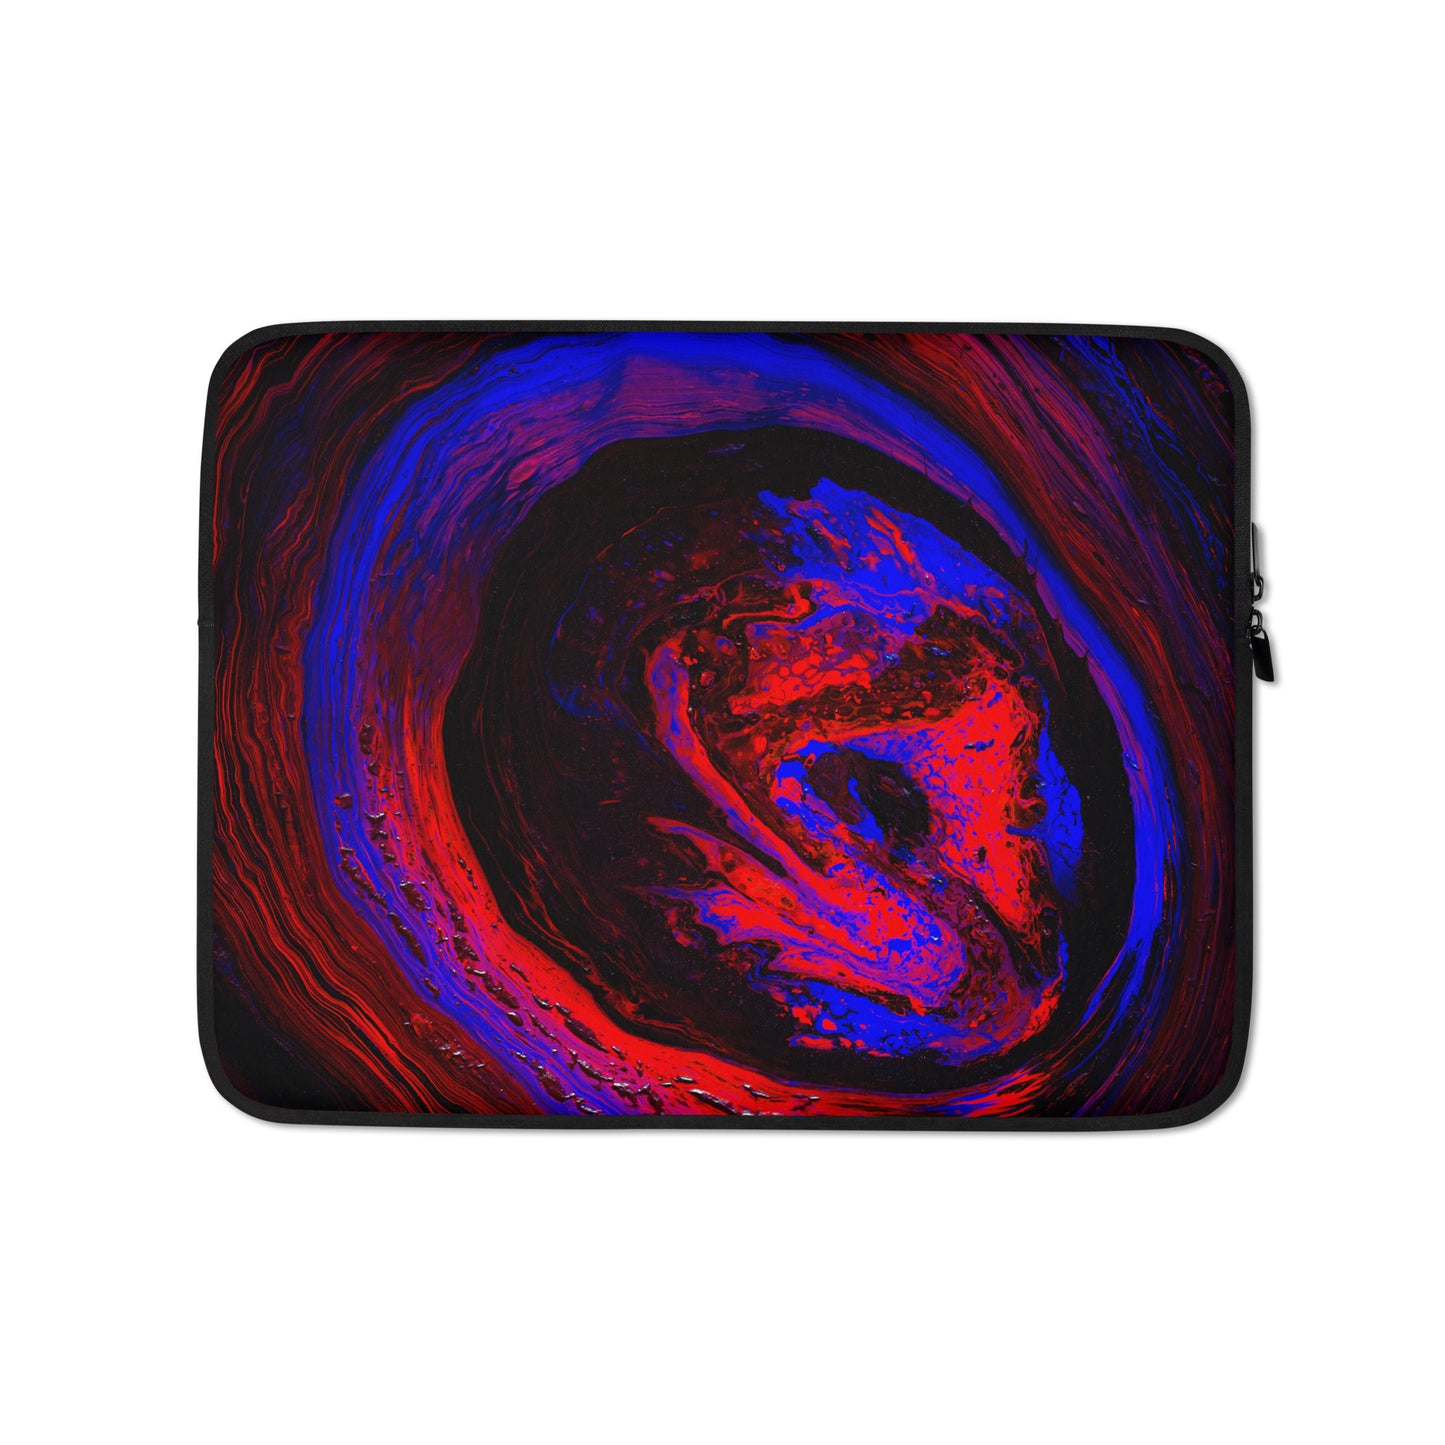 NightOwl Studio Padded Laptop Sleeve with Faux Fur Lining, 13 and 15 Inch Covers for Portable Computers and Large Tablets, Slim and Portable Neoprene for Work, Travel, or Gaming, Red Vortex